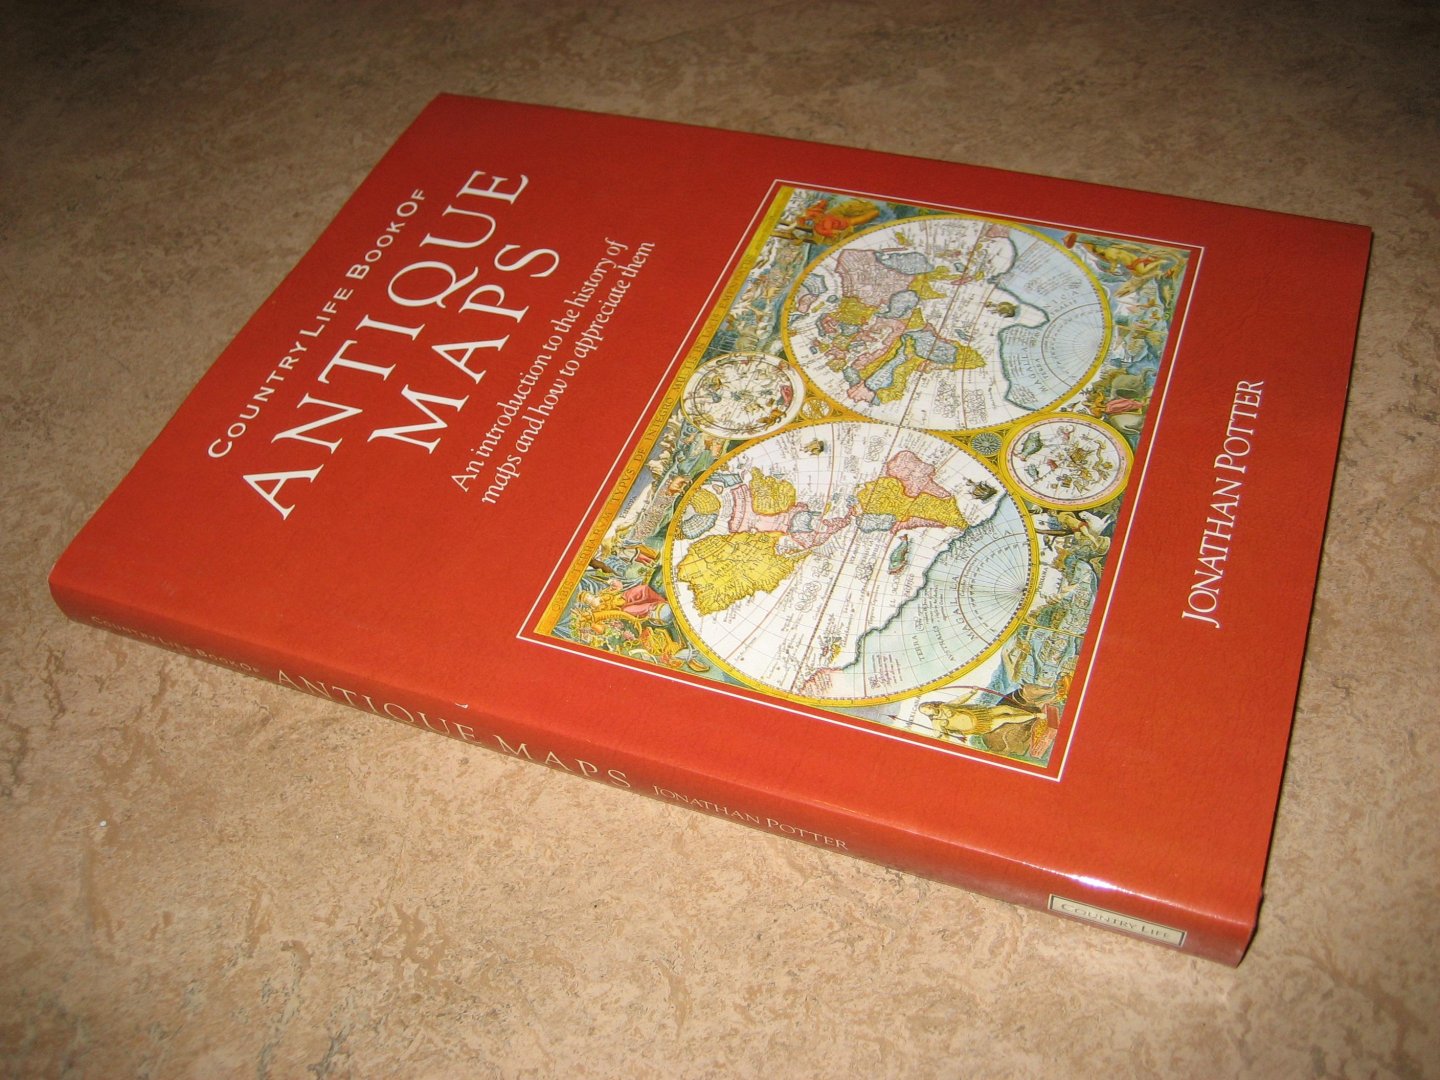 Potter, Jonathan - Country Life Book of Antique Maps. An introduction to the history of maps and how to appreciate them